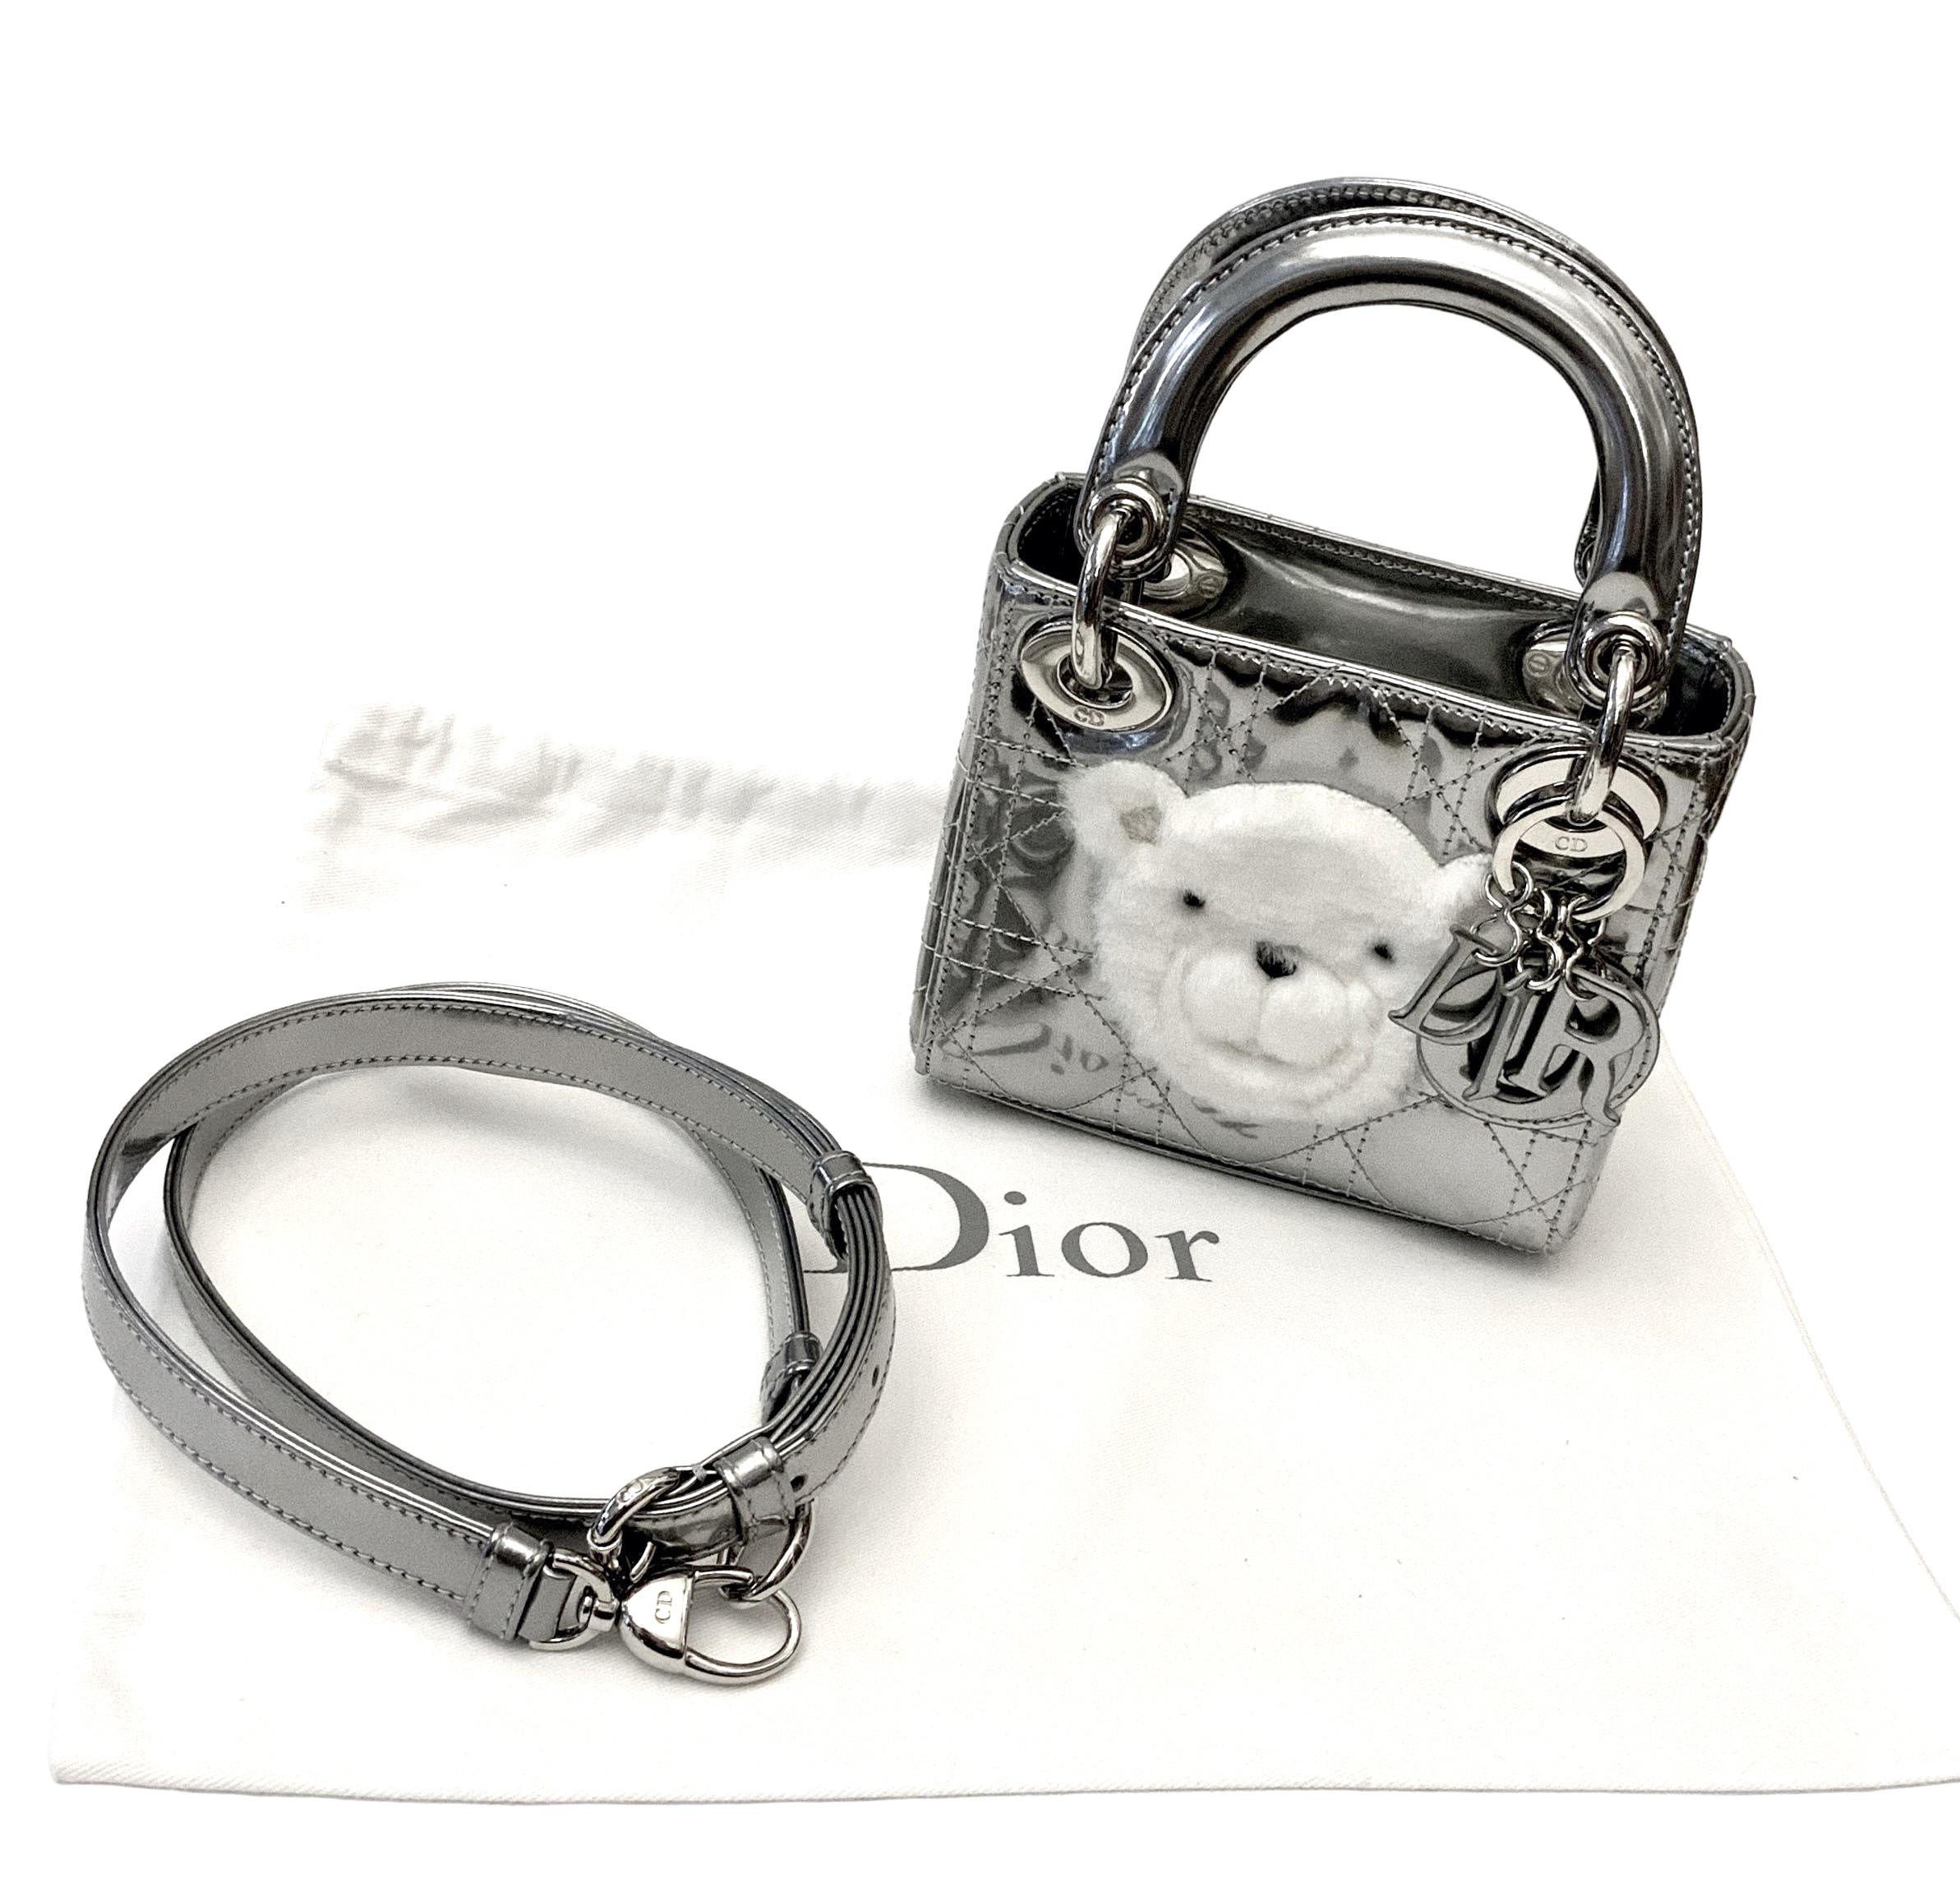 To celebrate half a century of existence of Baby Dior, the house of Christian Dior has imagined and realized a Nano Lady Dior Bag for little hands !
It is crafted in stitched mirror leather with the emblematic 